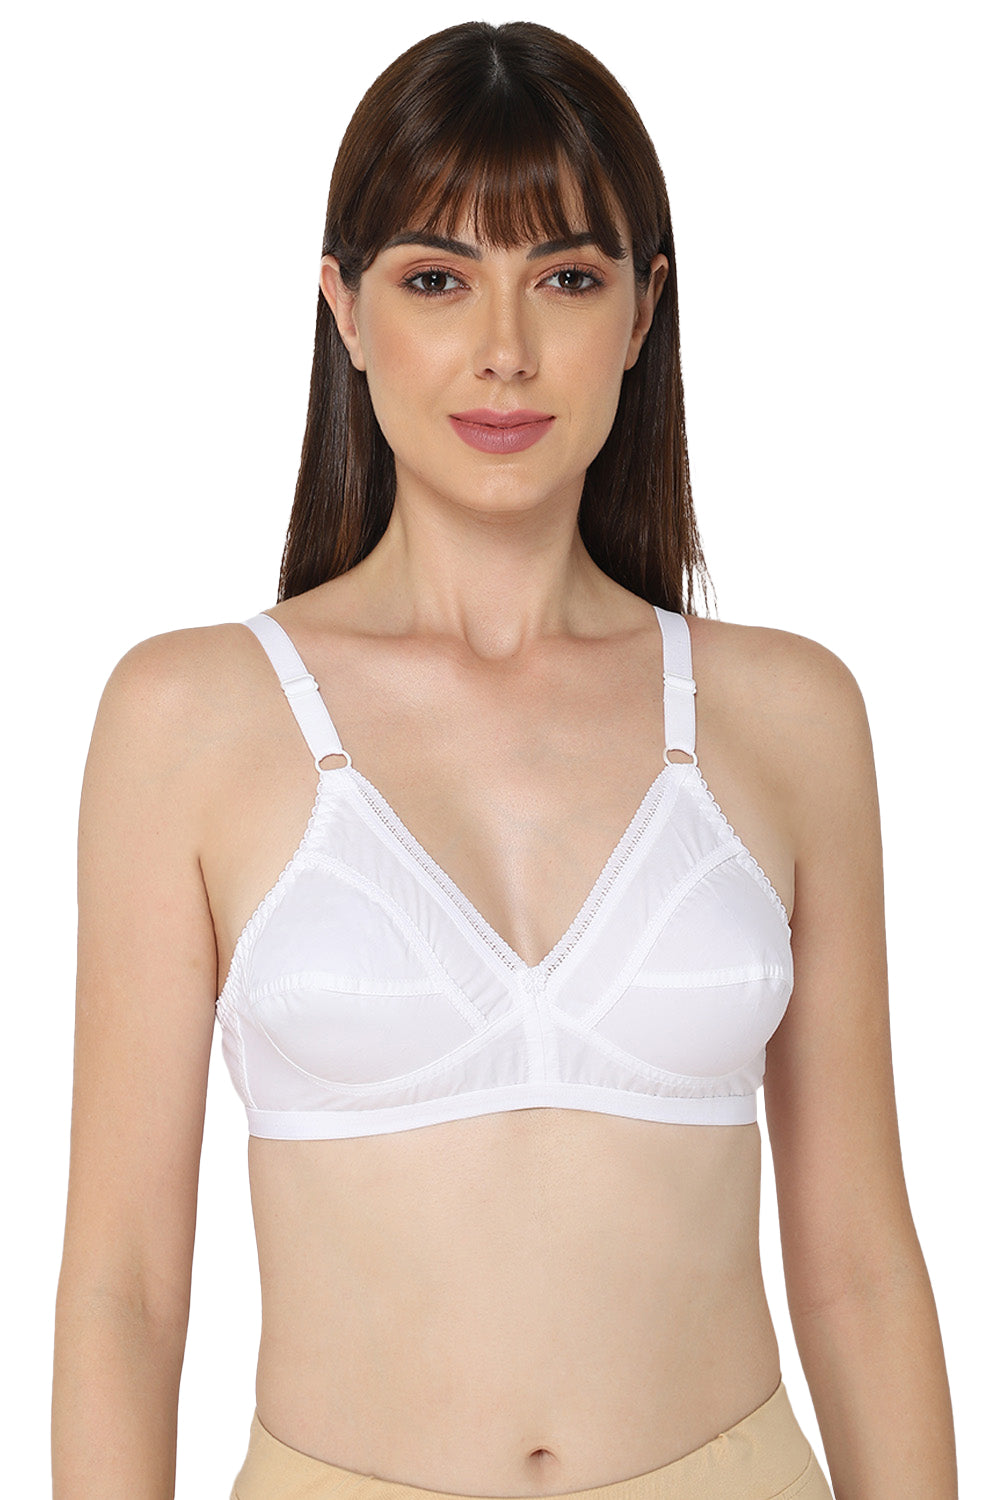 Naidu Hall Heritage-Bra Special Combo Pack - Naturalle - C43